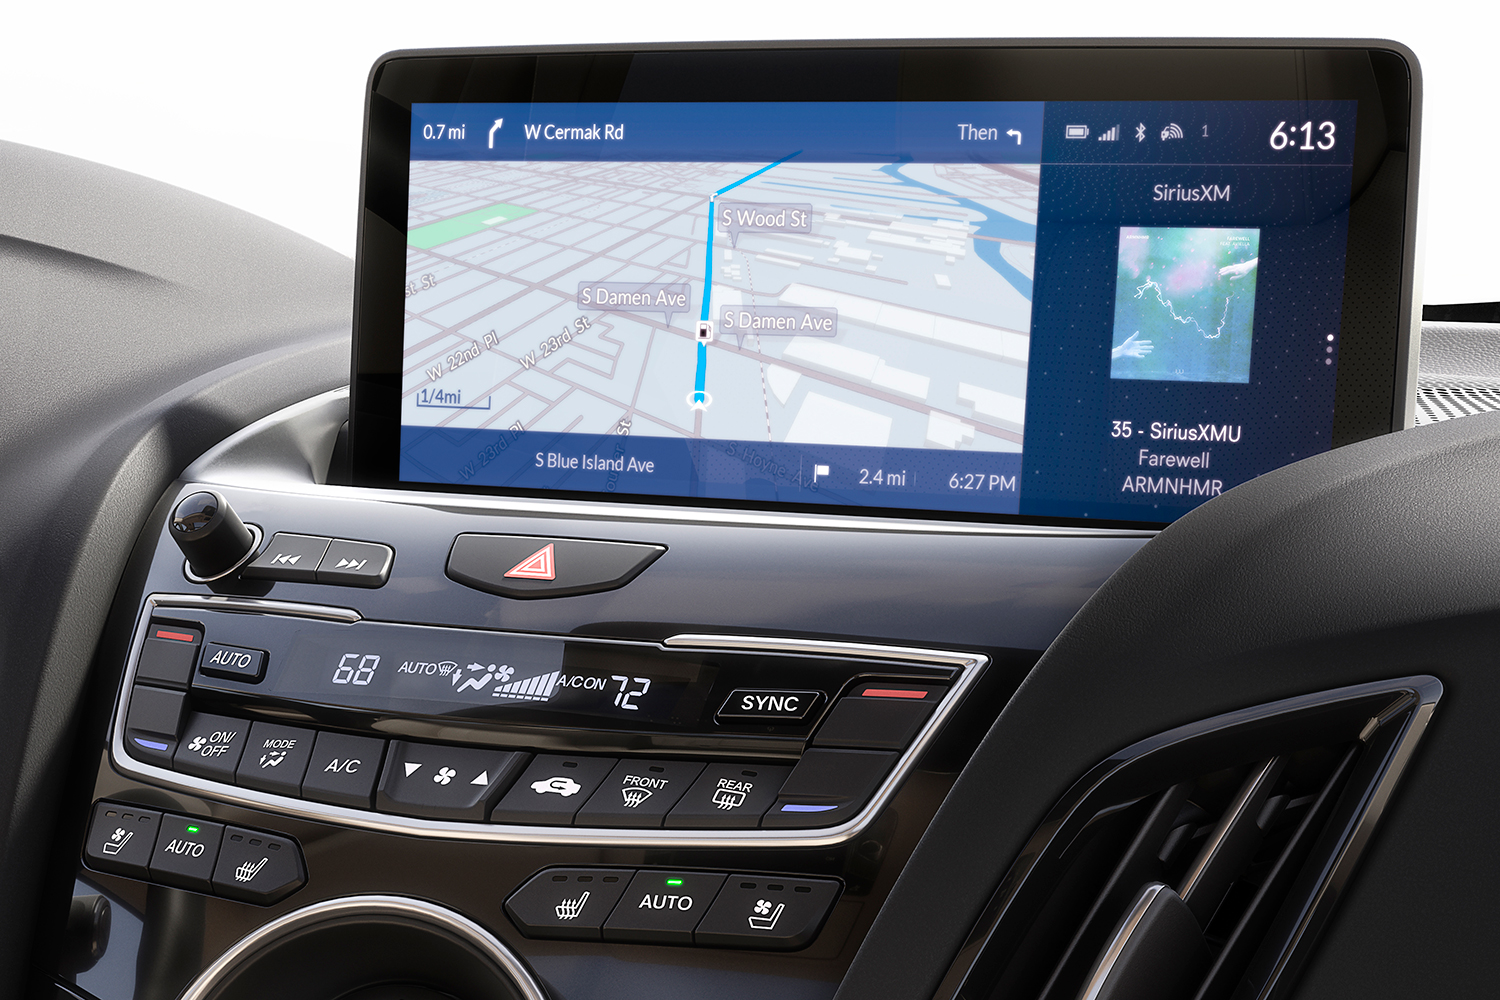 acura true touchpad infotainment system review rdx19 p015a